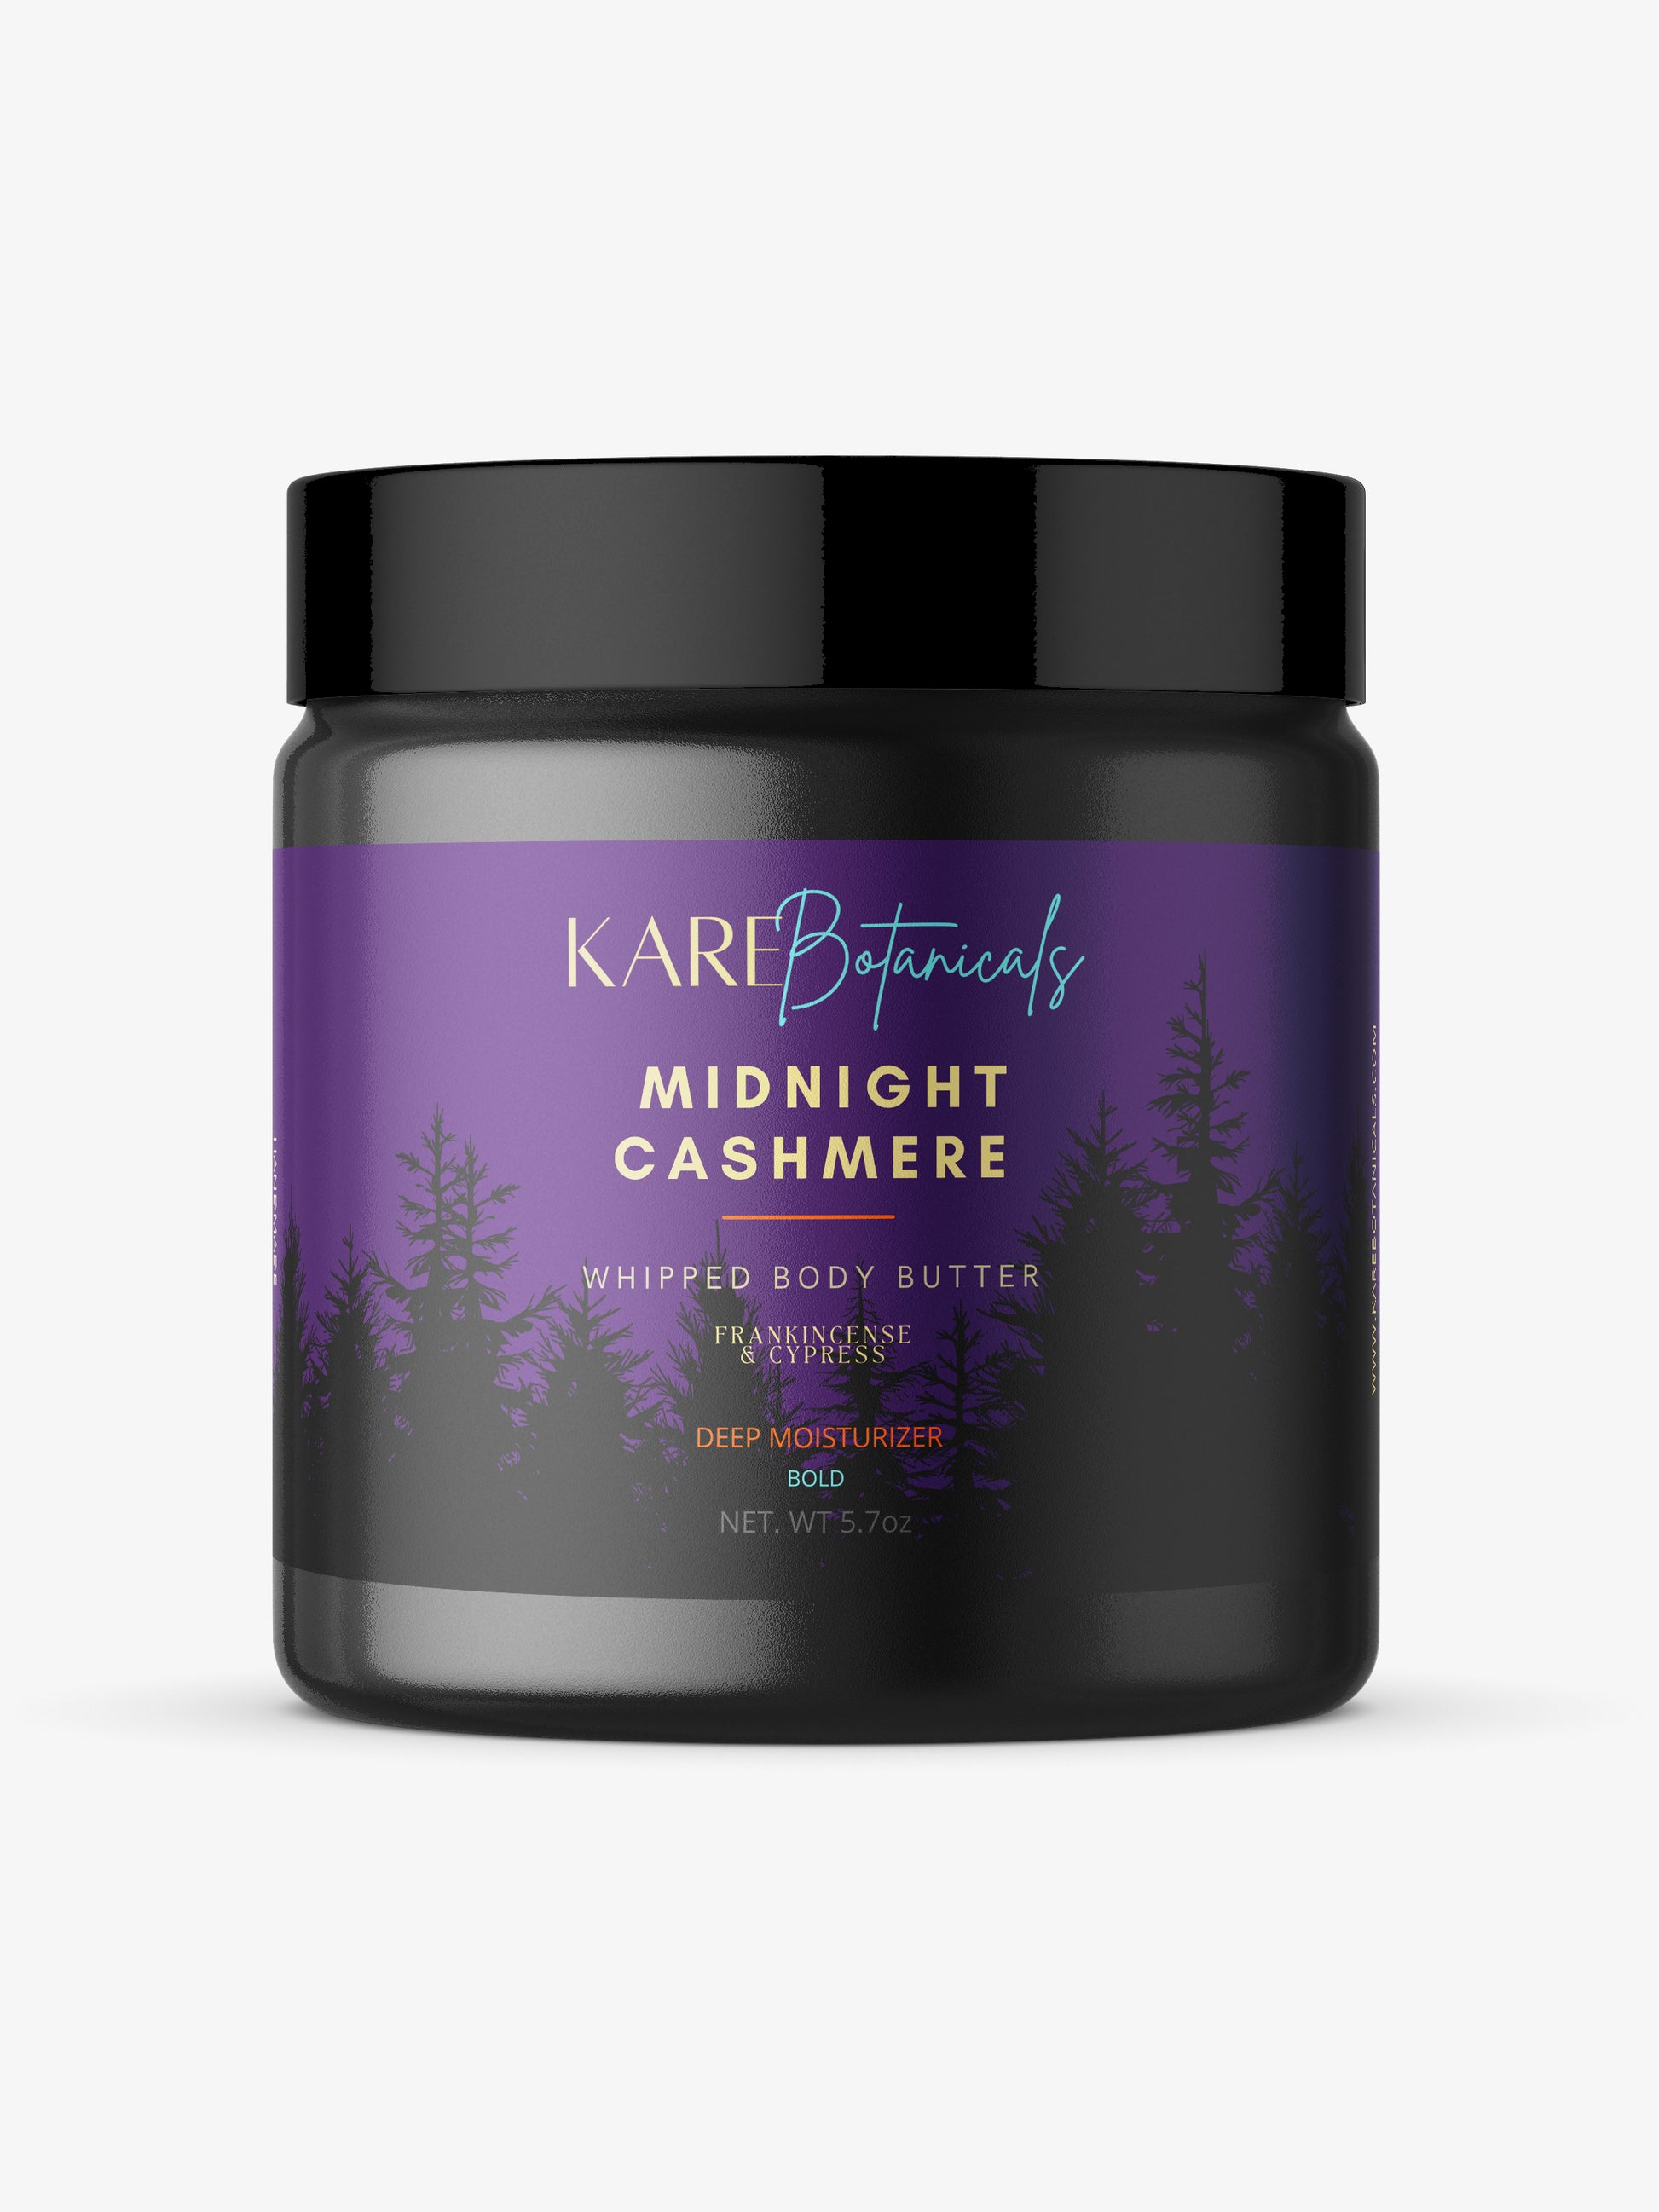 Kare Botanicals Midnight Cashmere whipped body butter for men/neutral. Deep moisturizing, scented body lotion with  frankincense and cypress essential oils. Palm-oil free. Made with shea butter, mango butter and coconut oil.  Has a luxurious woodsy with vanilla under tone fragrance. 